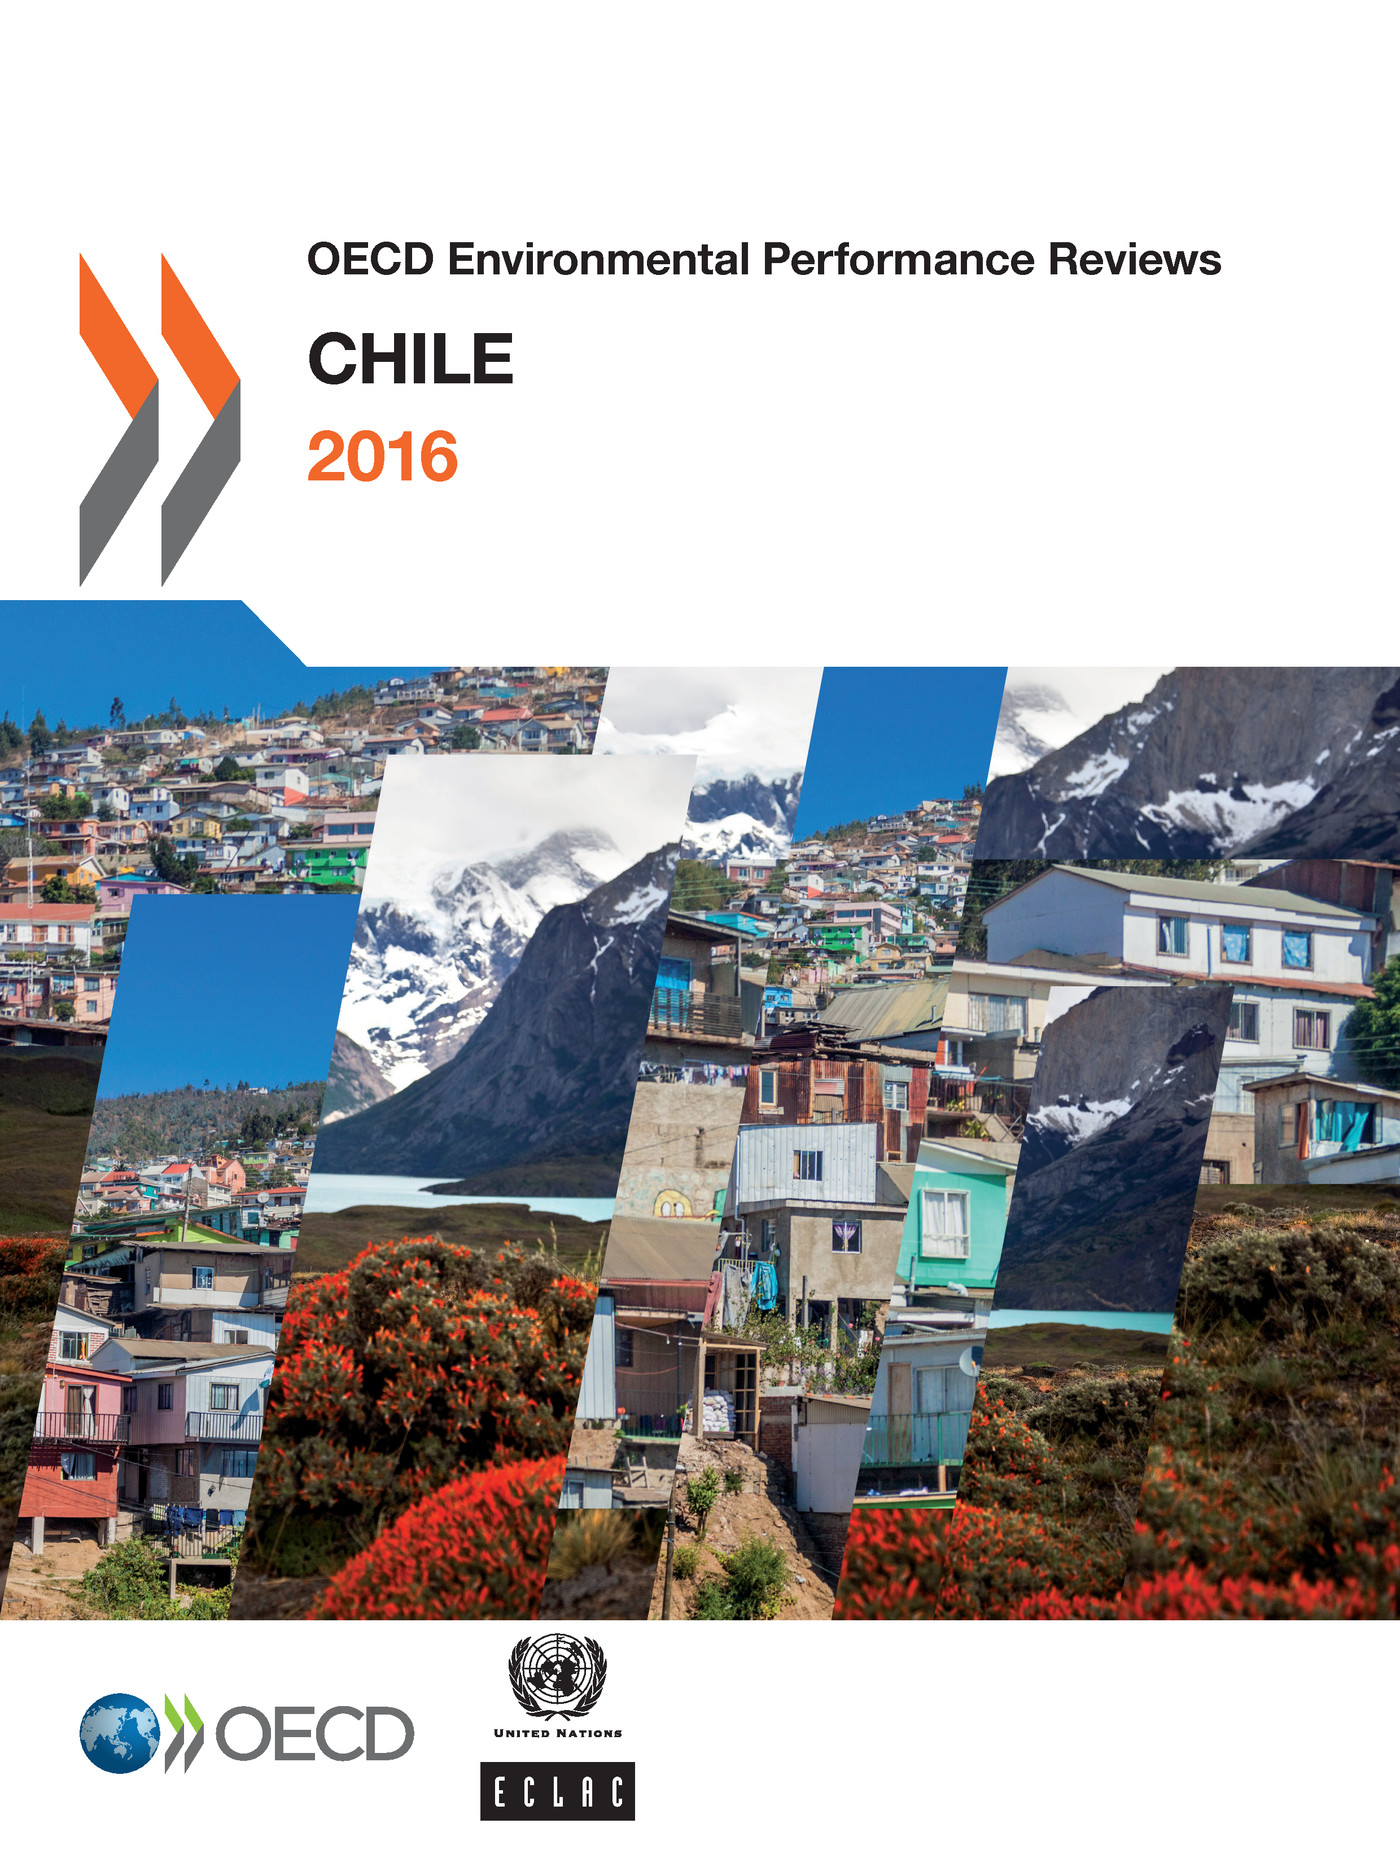 OECD Environmental Performance Reviews: Chile 2016 -  Collectif - OCDE / OECD